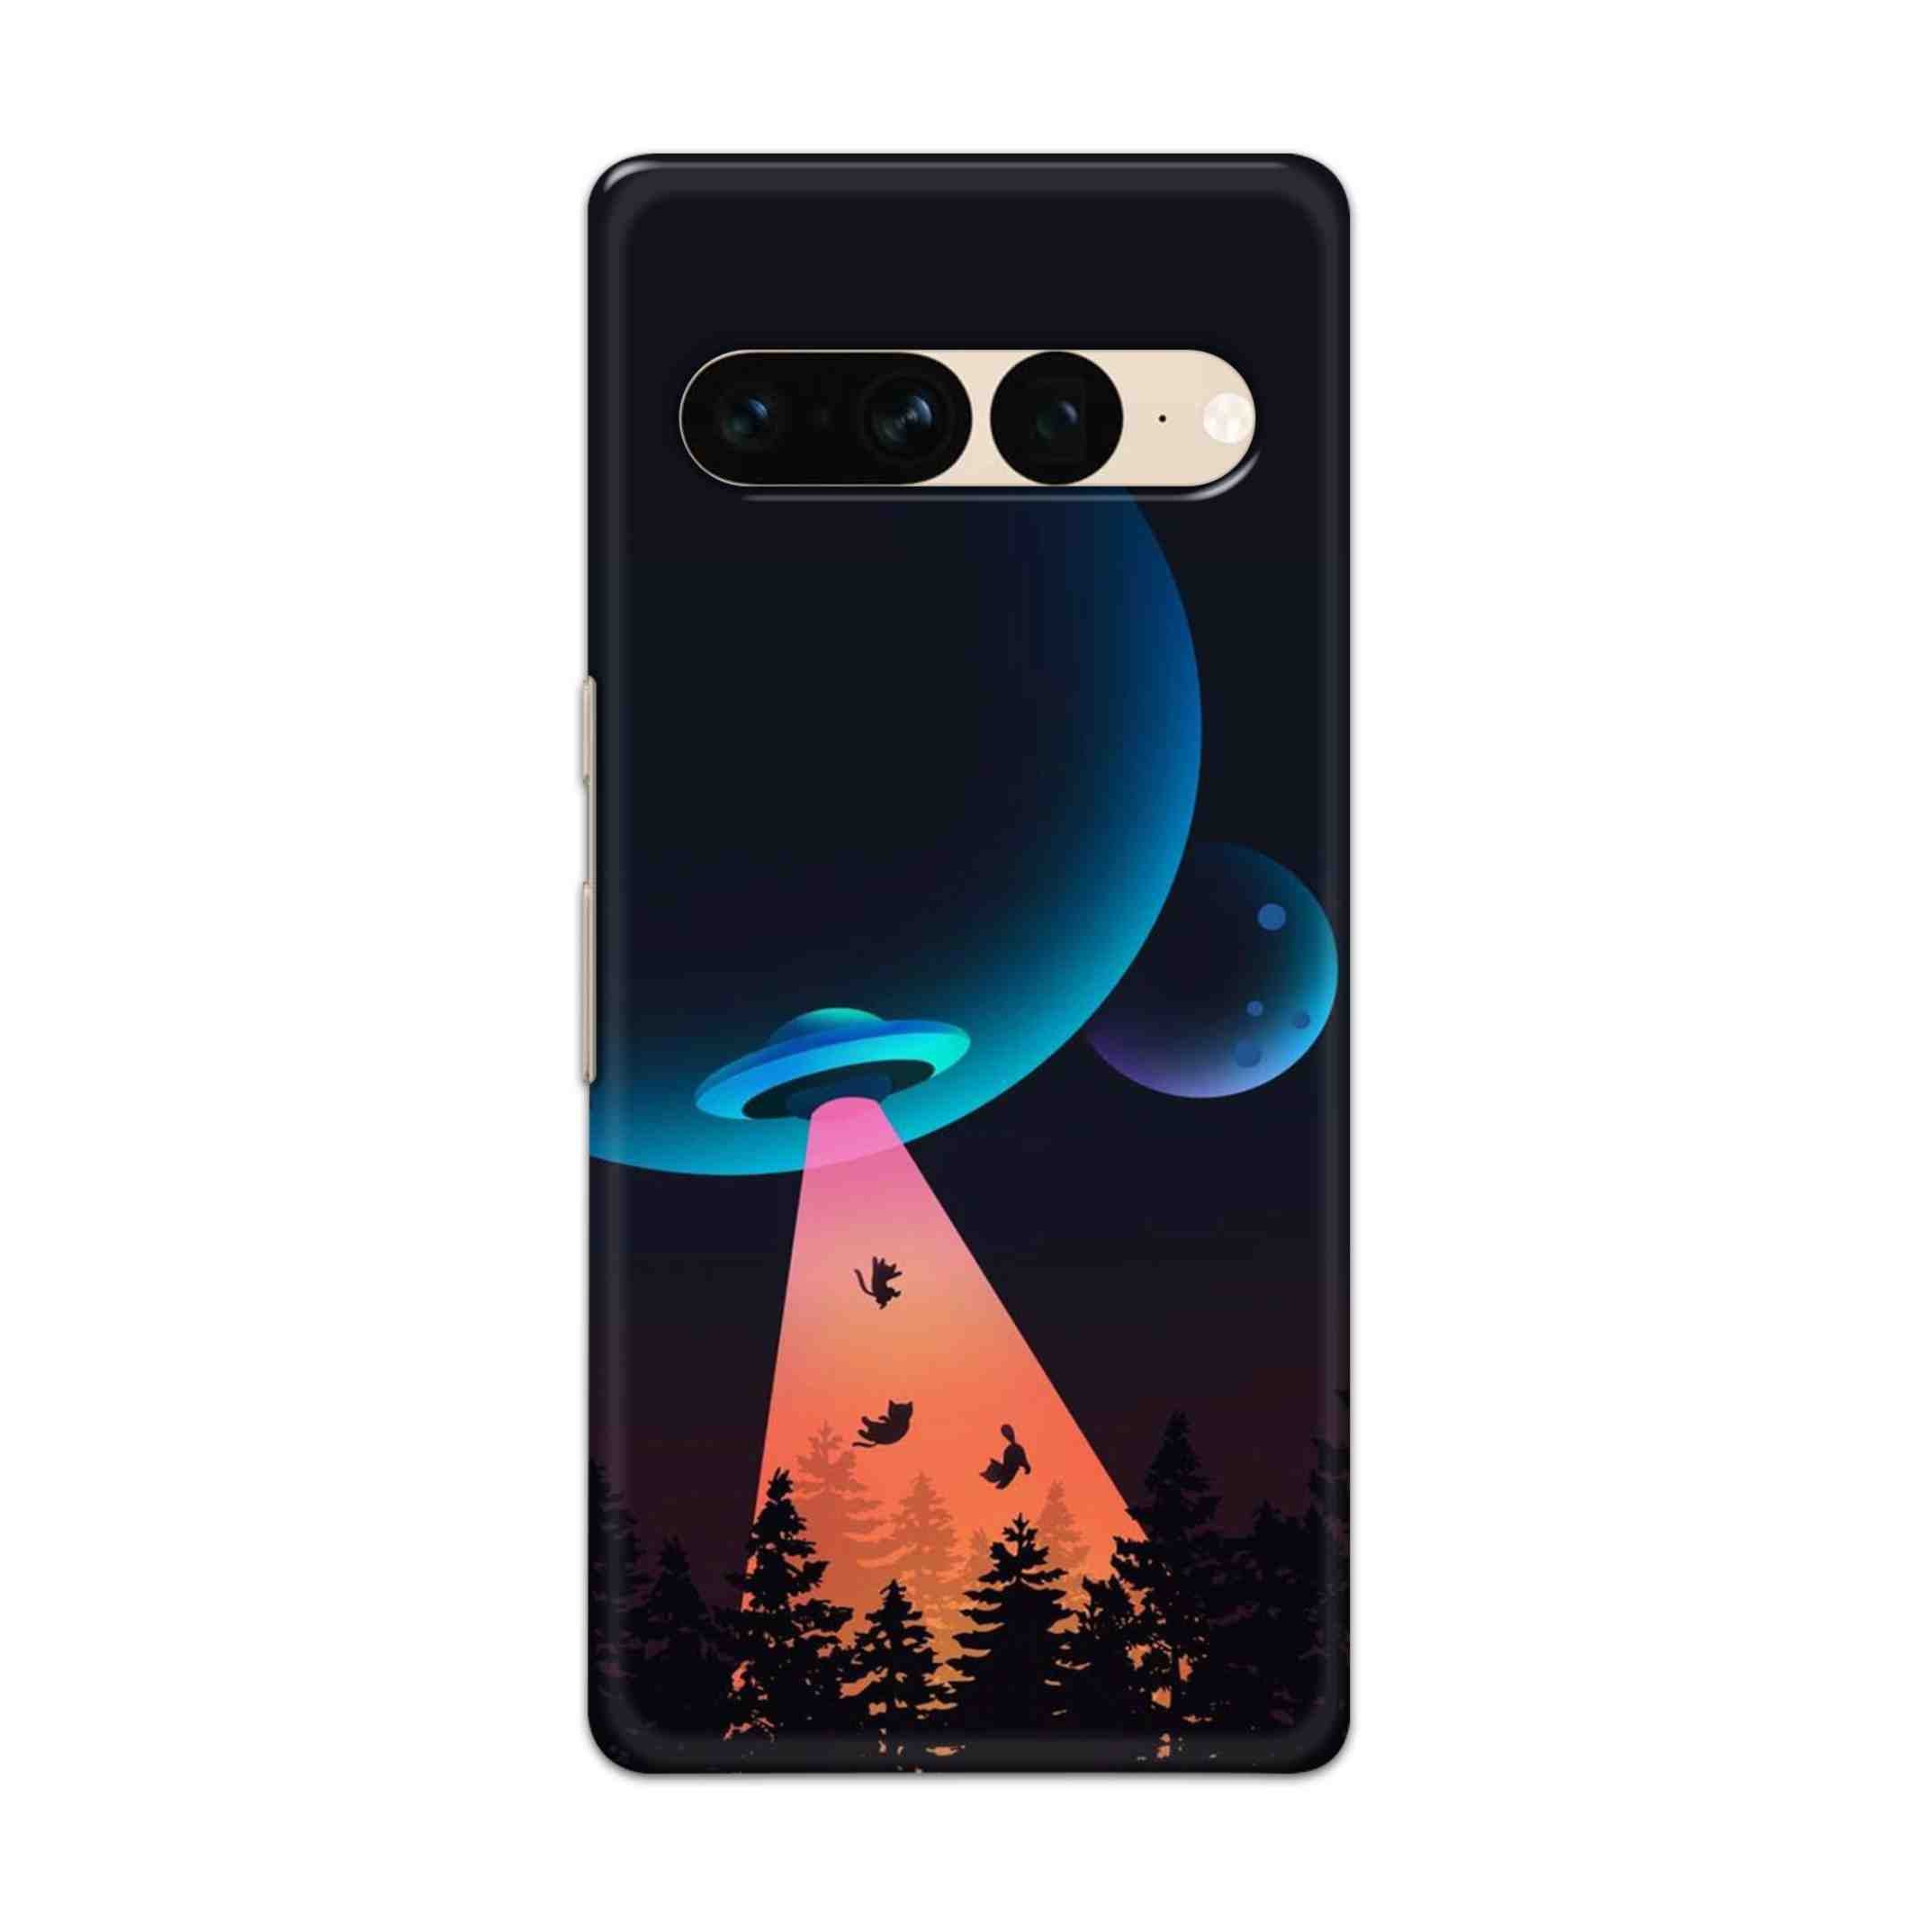 Buy Spaceship Hard Back Mobile Phone Case Cover For Google Pixel 7 Pro Online